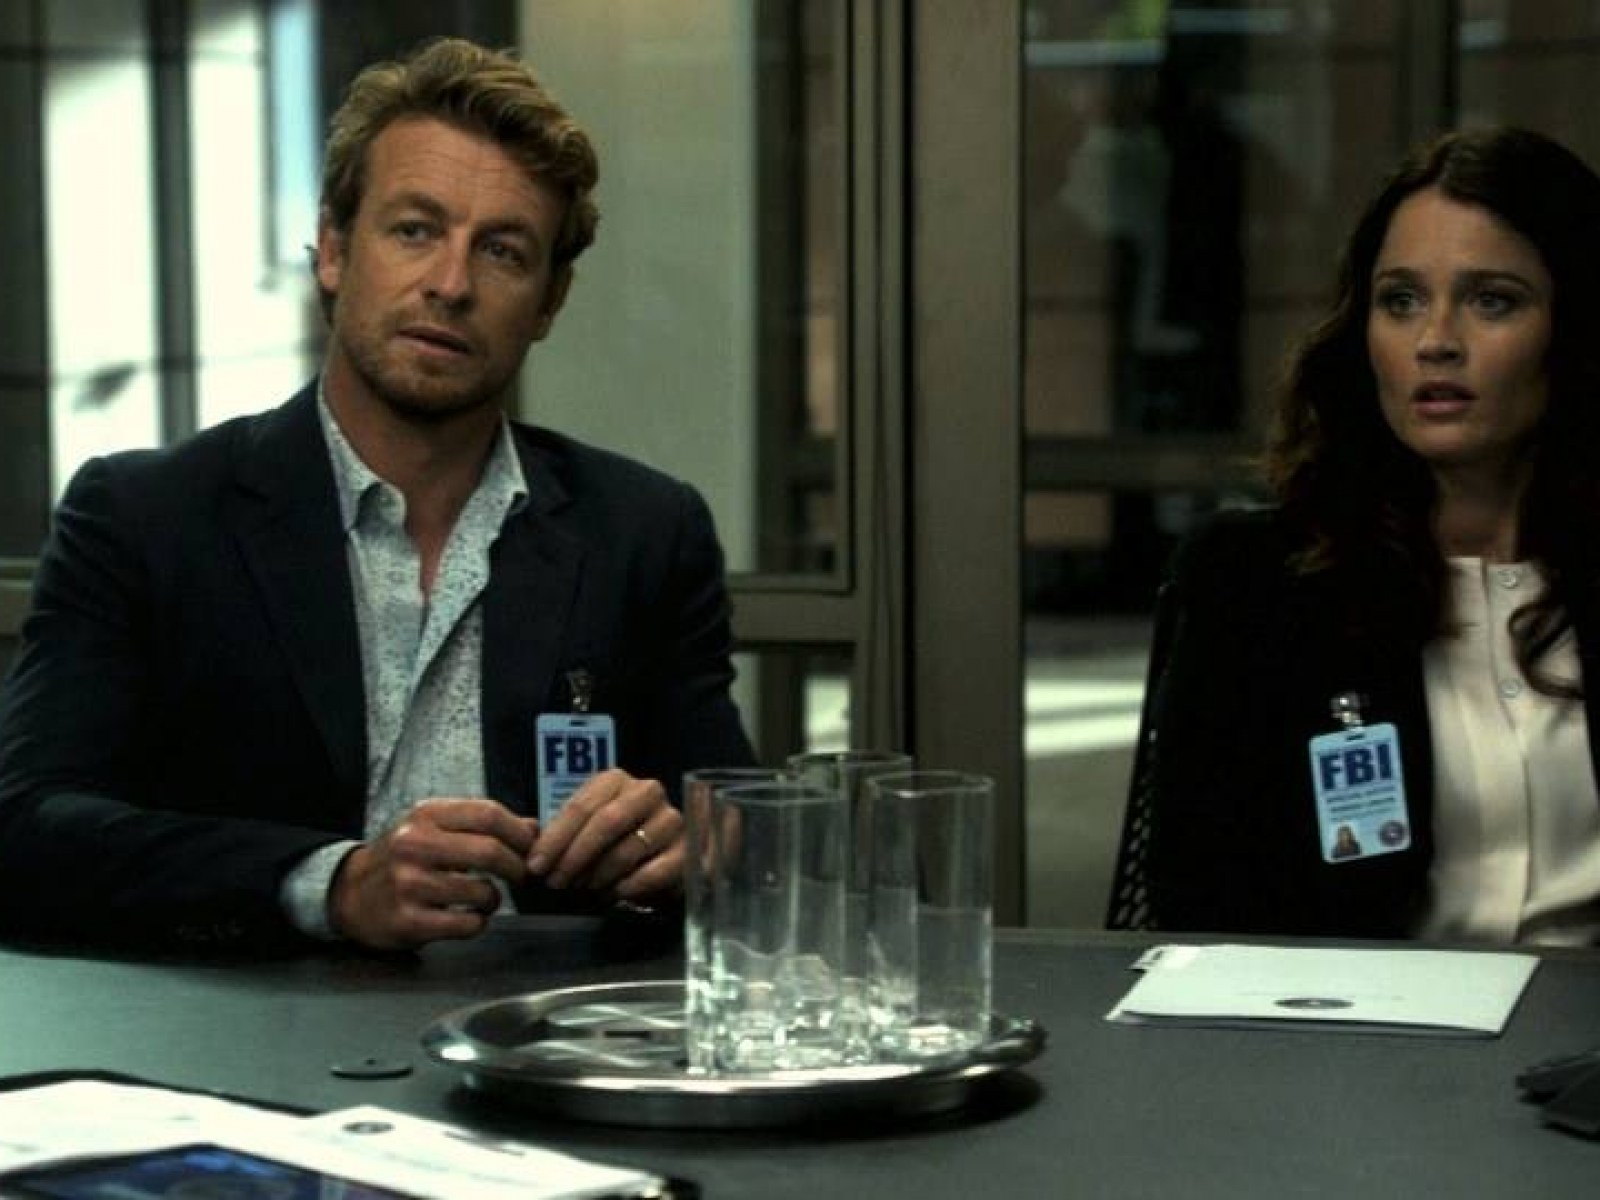 The Mentalist Season 6: New Episode 'Black Helicopters' Has Conspiracy,  Mexico and 'Classic' Jane